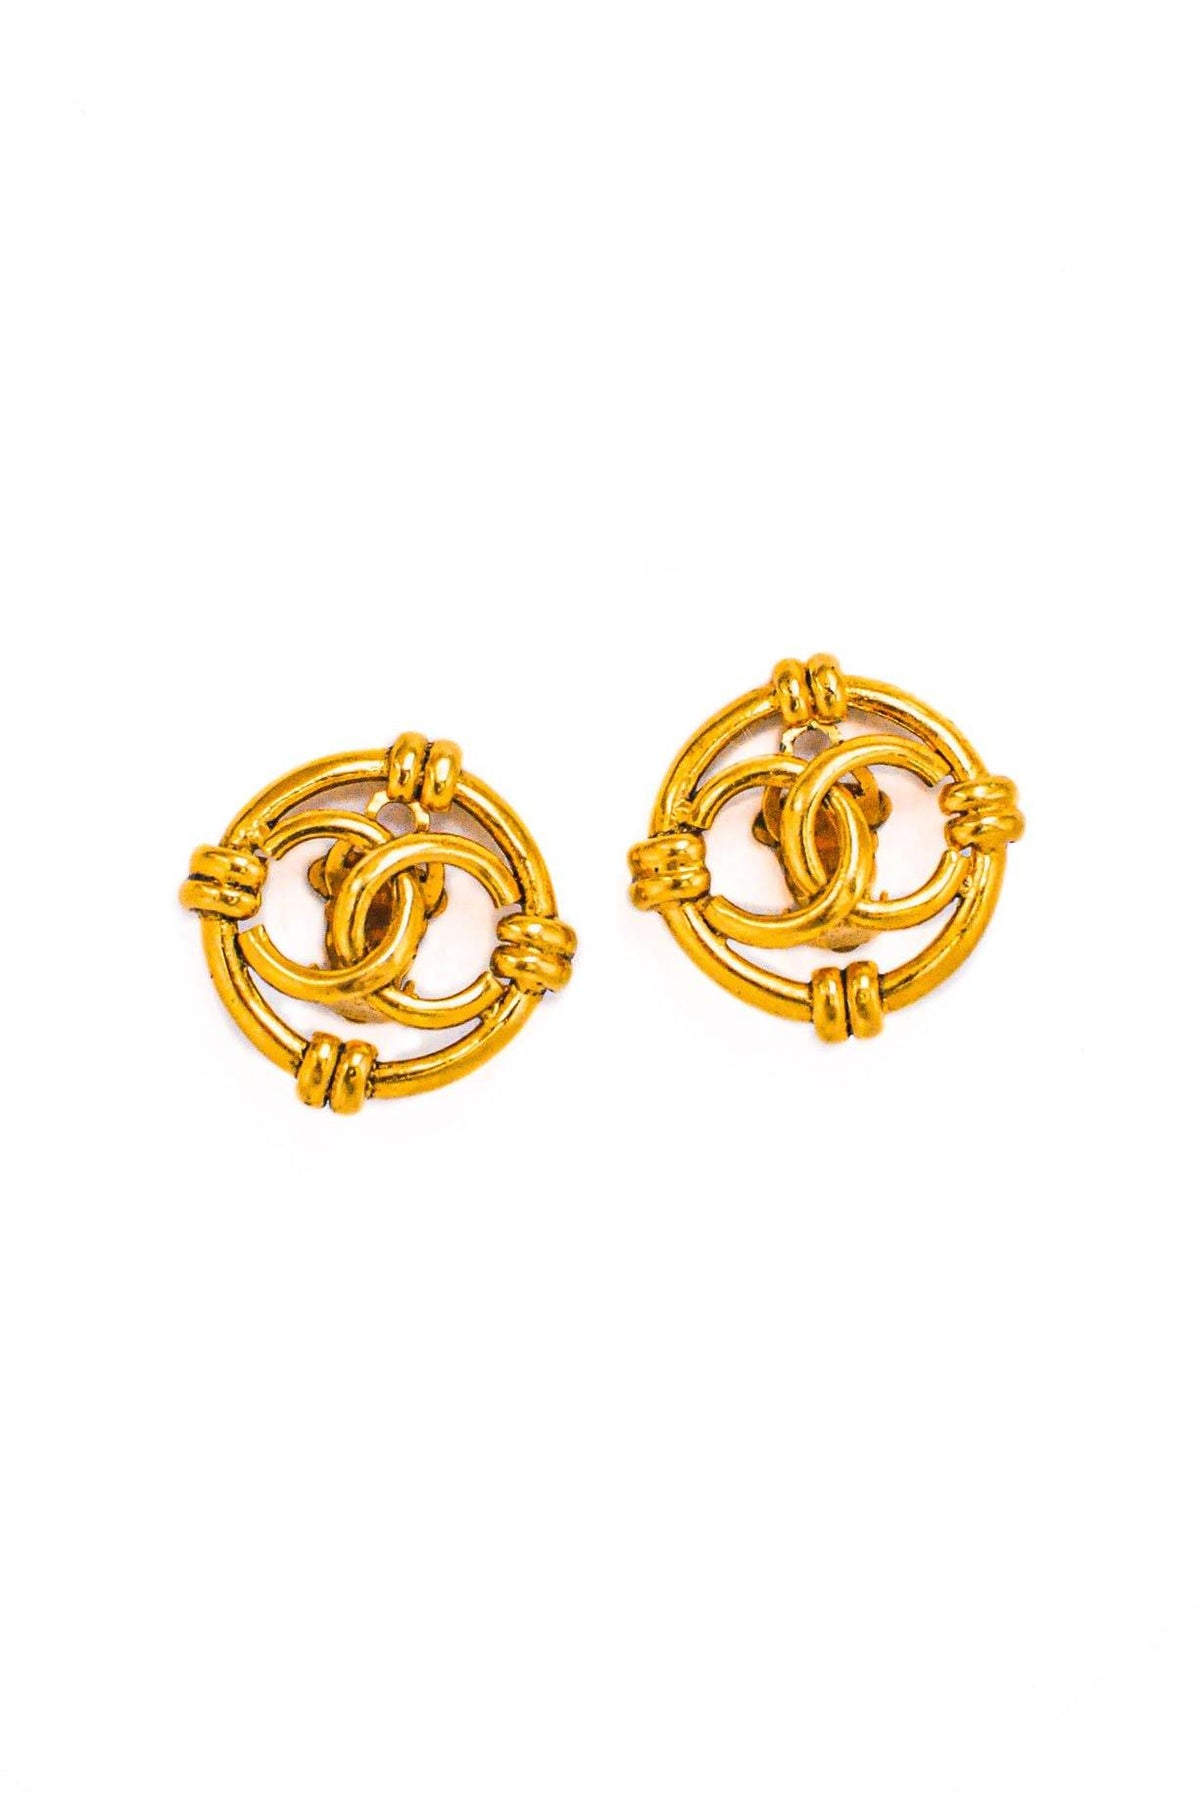 Vintage Chanel CC Cutout Clip-on Earrings from Sweet and Spark